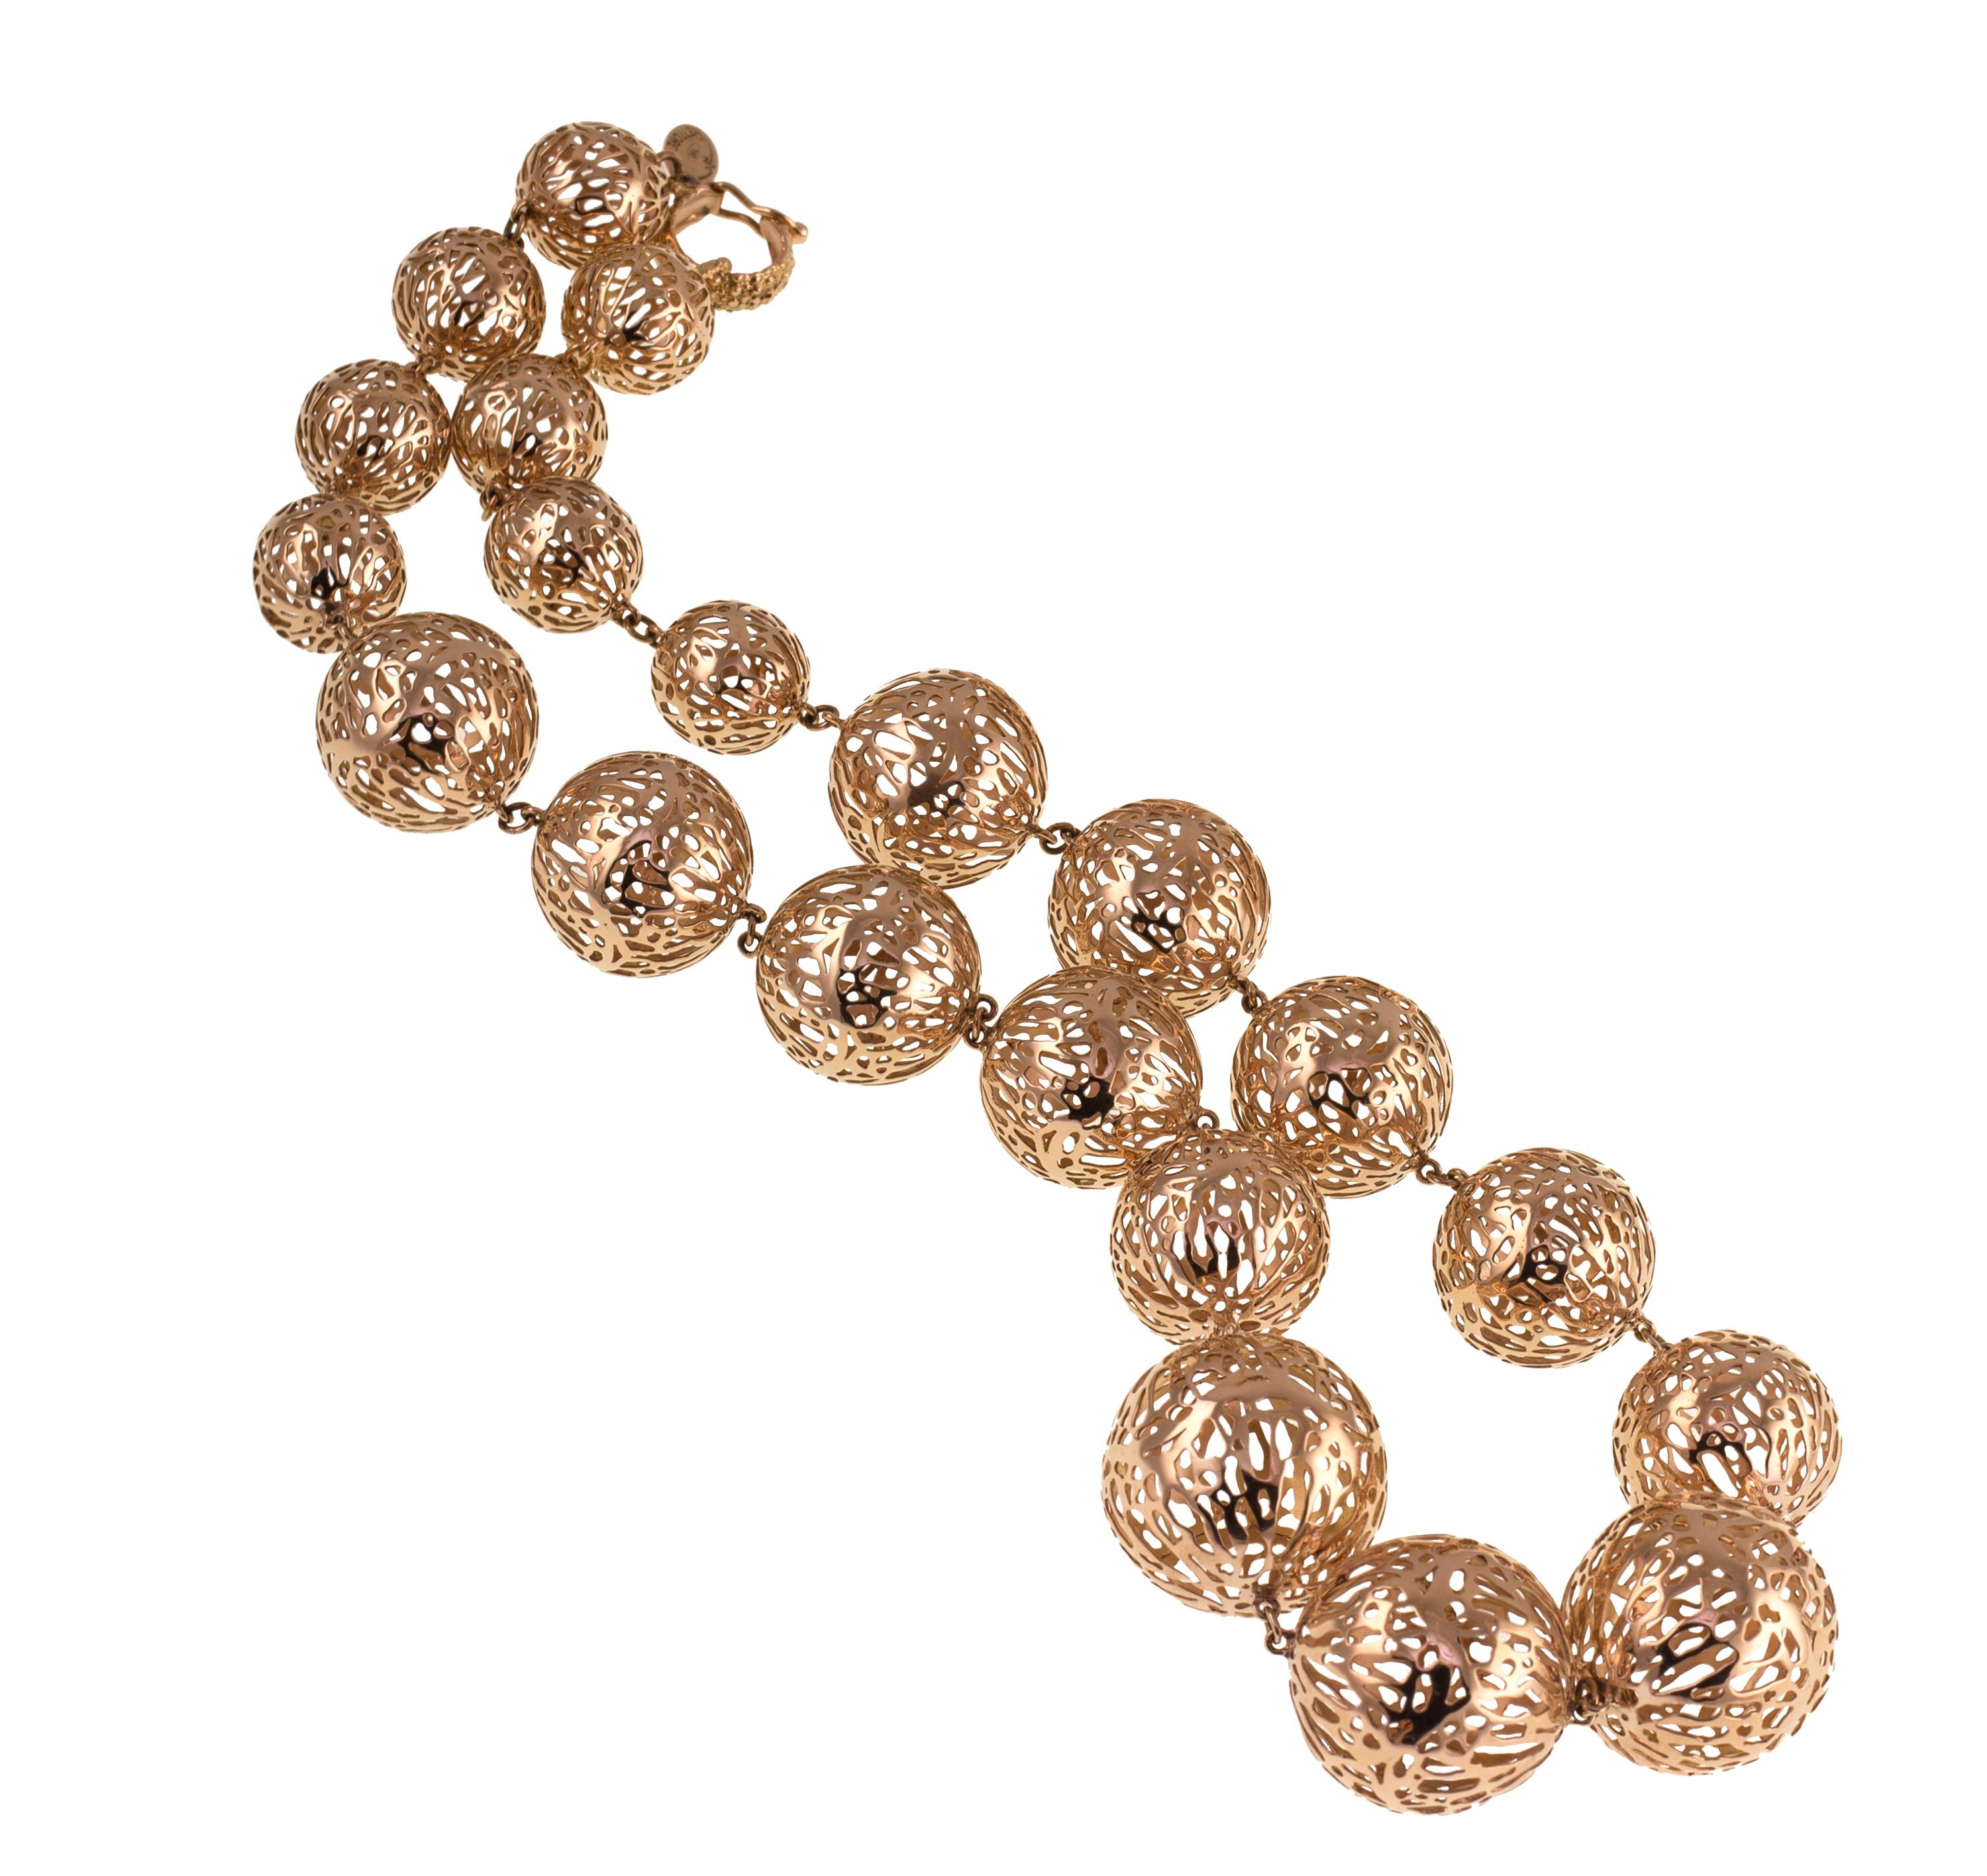 Gorgonia style perforated Spheres Necklace in 18 Karat Rose Gold gr. 37,20, with the designer's iconic perforated 